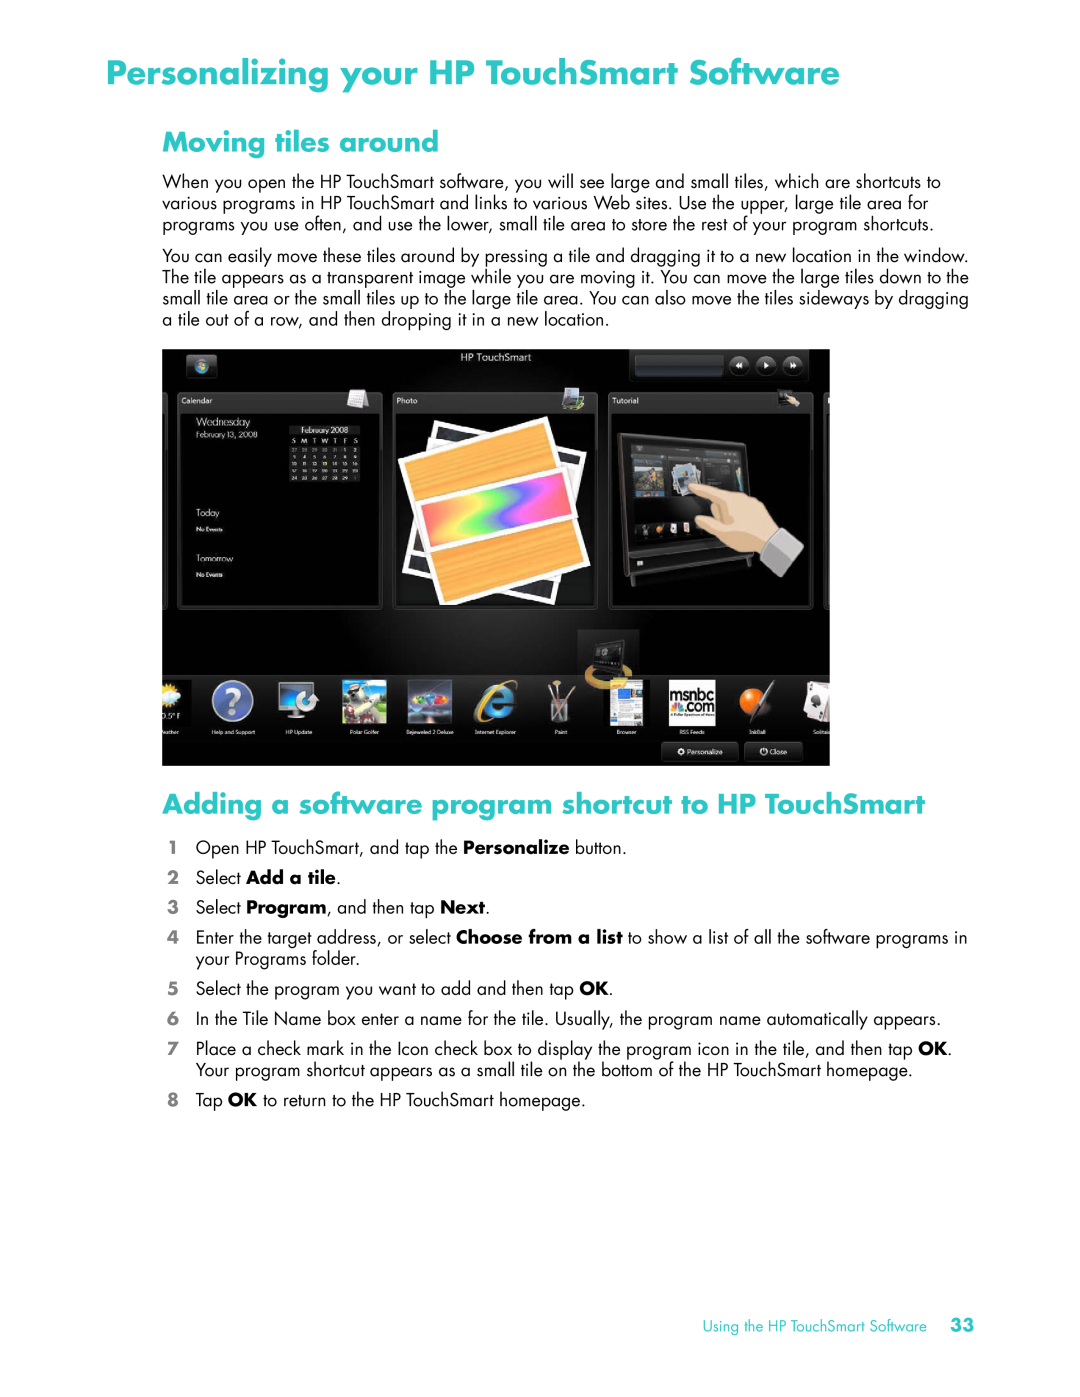 HP IQ504 KQ436AA-NOOS, 22 Inch KQ437AA Personalizing your HP TouchSmart Software, Moving tiles around, Select Add a tile 